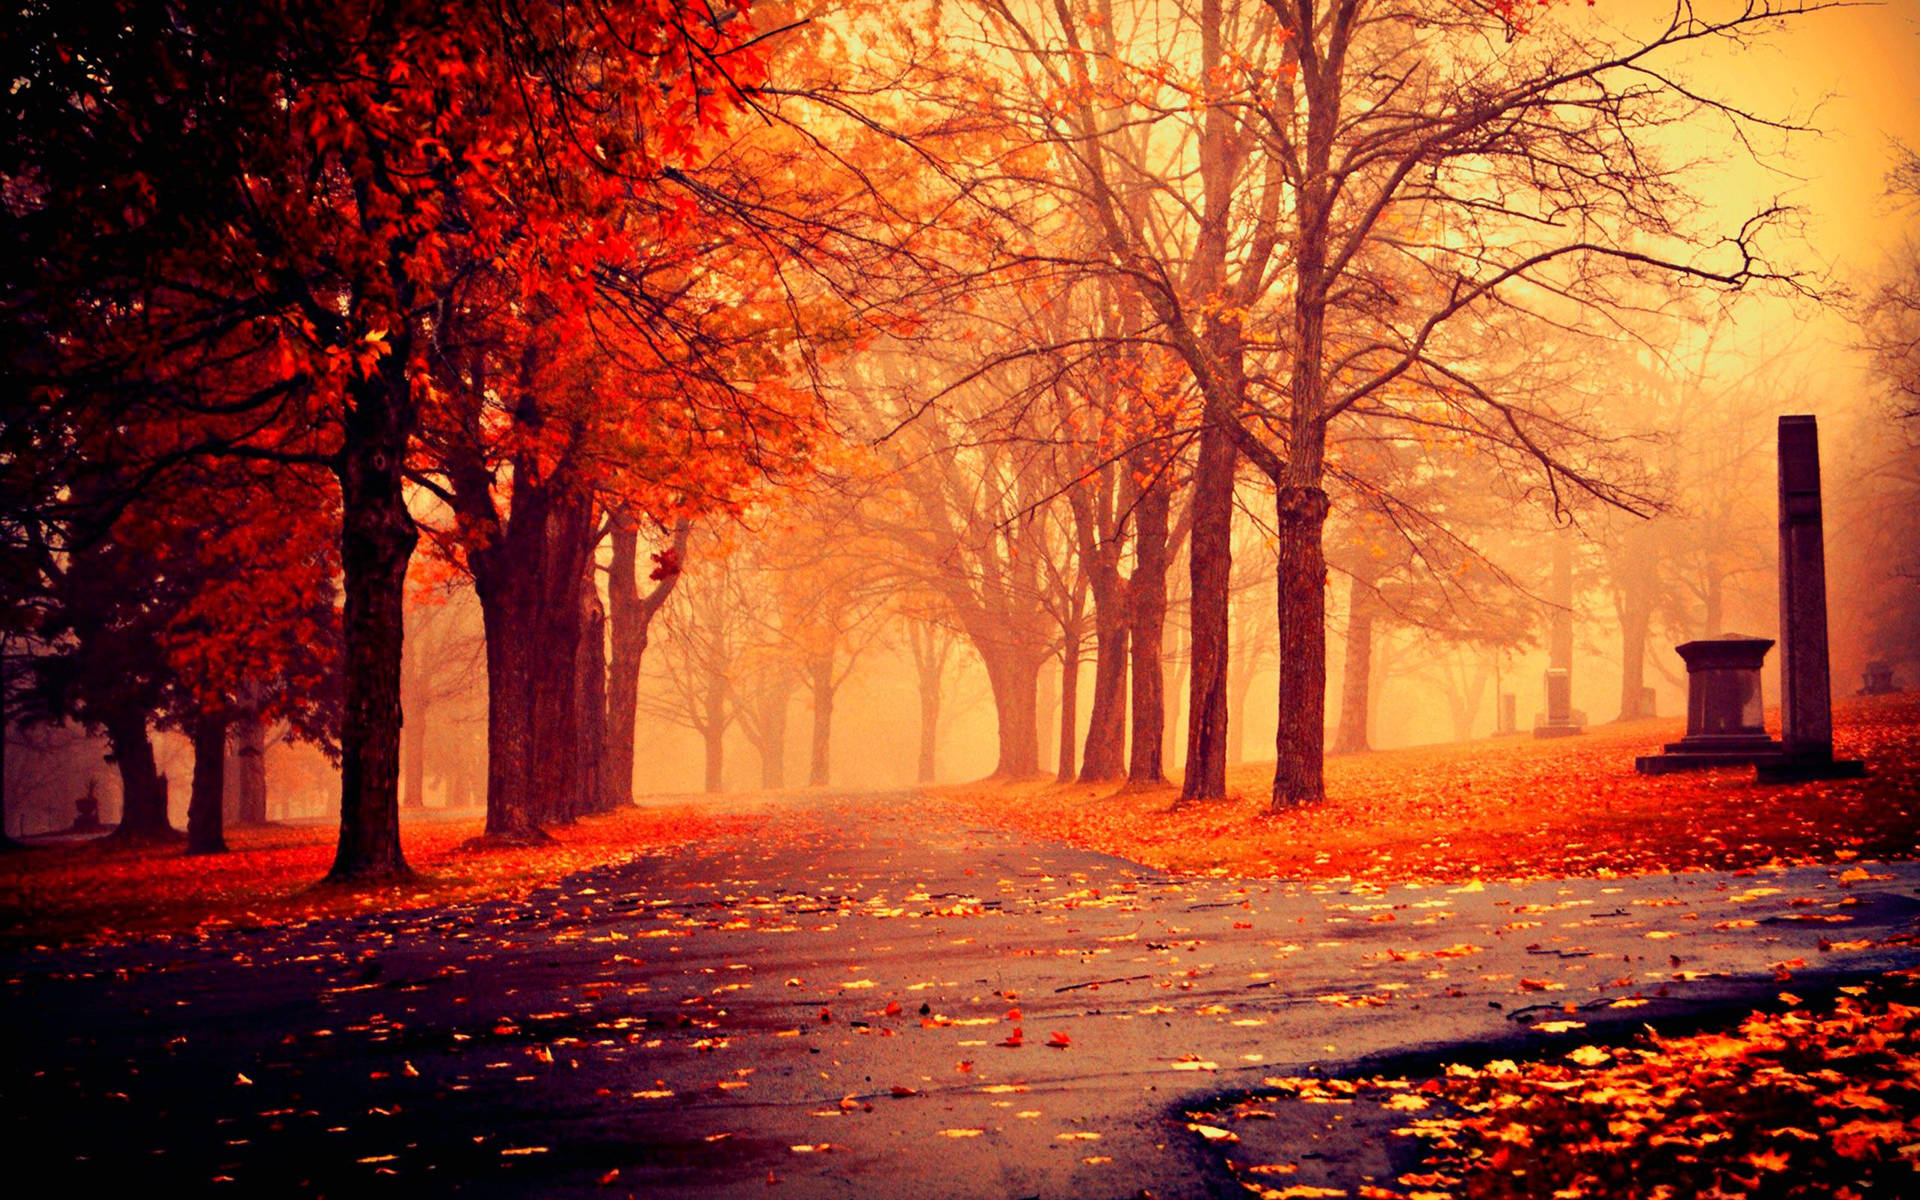 Country road surrounded by red trees and fallen leaves, dreamy and scenic background.